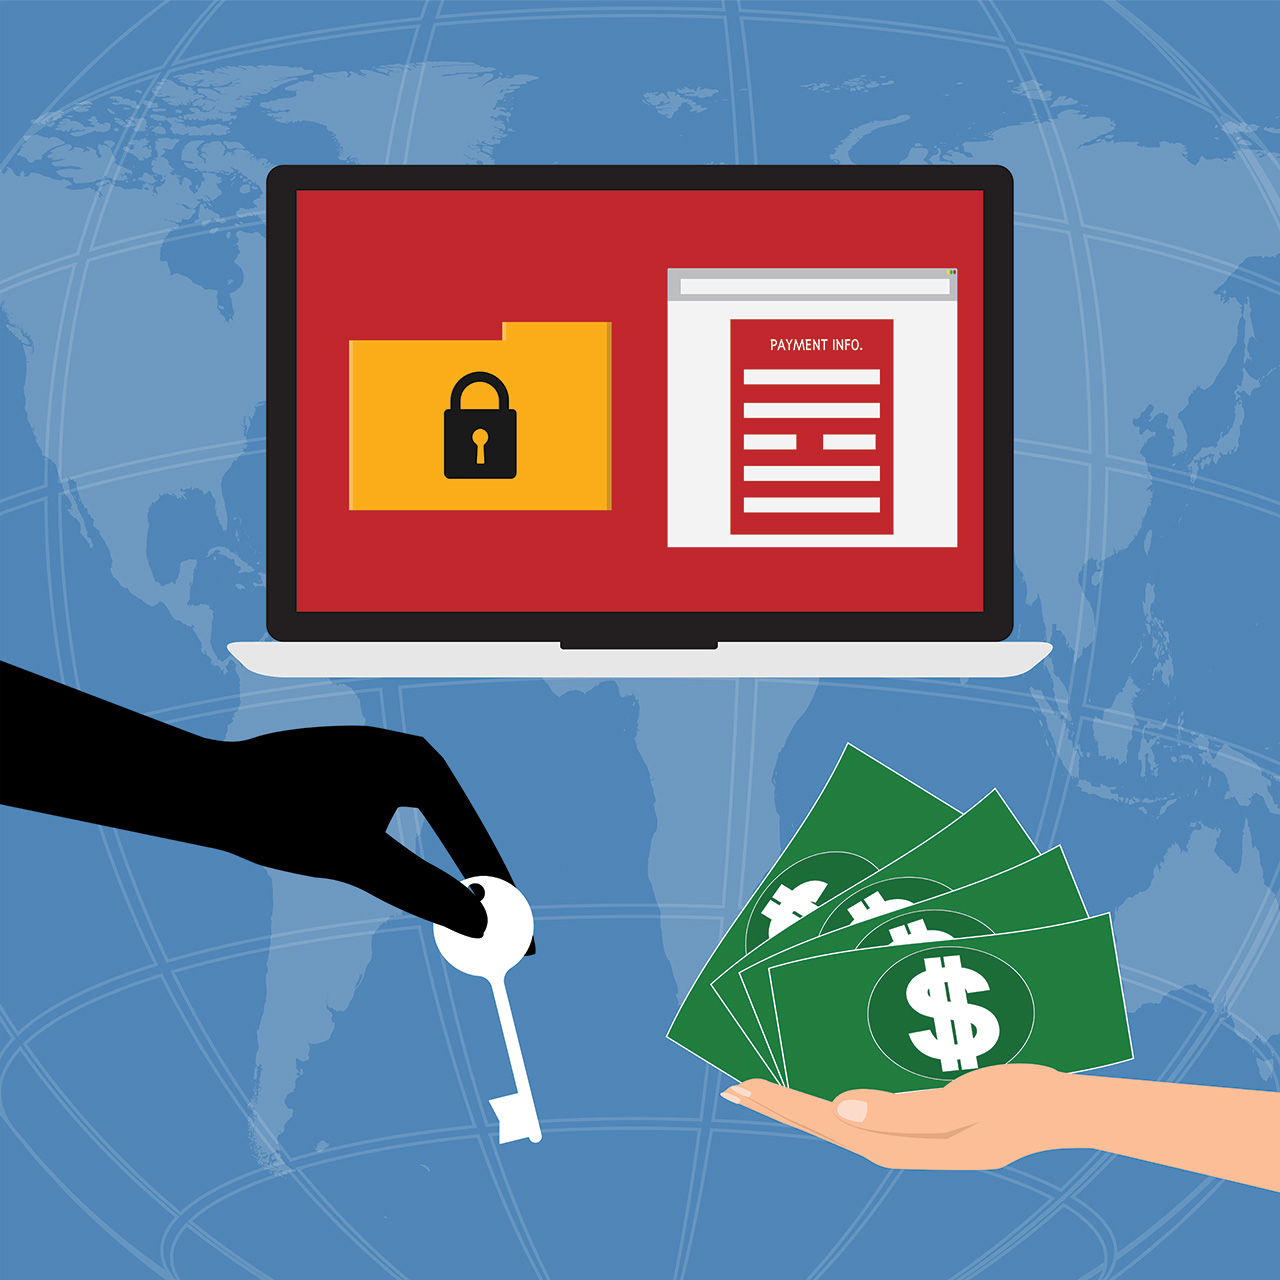 Ransomware: A New Global Issue for Health Care